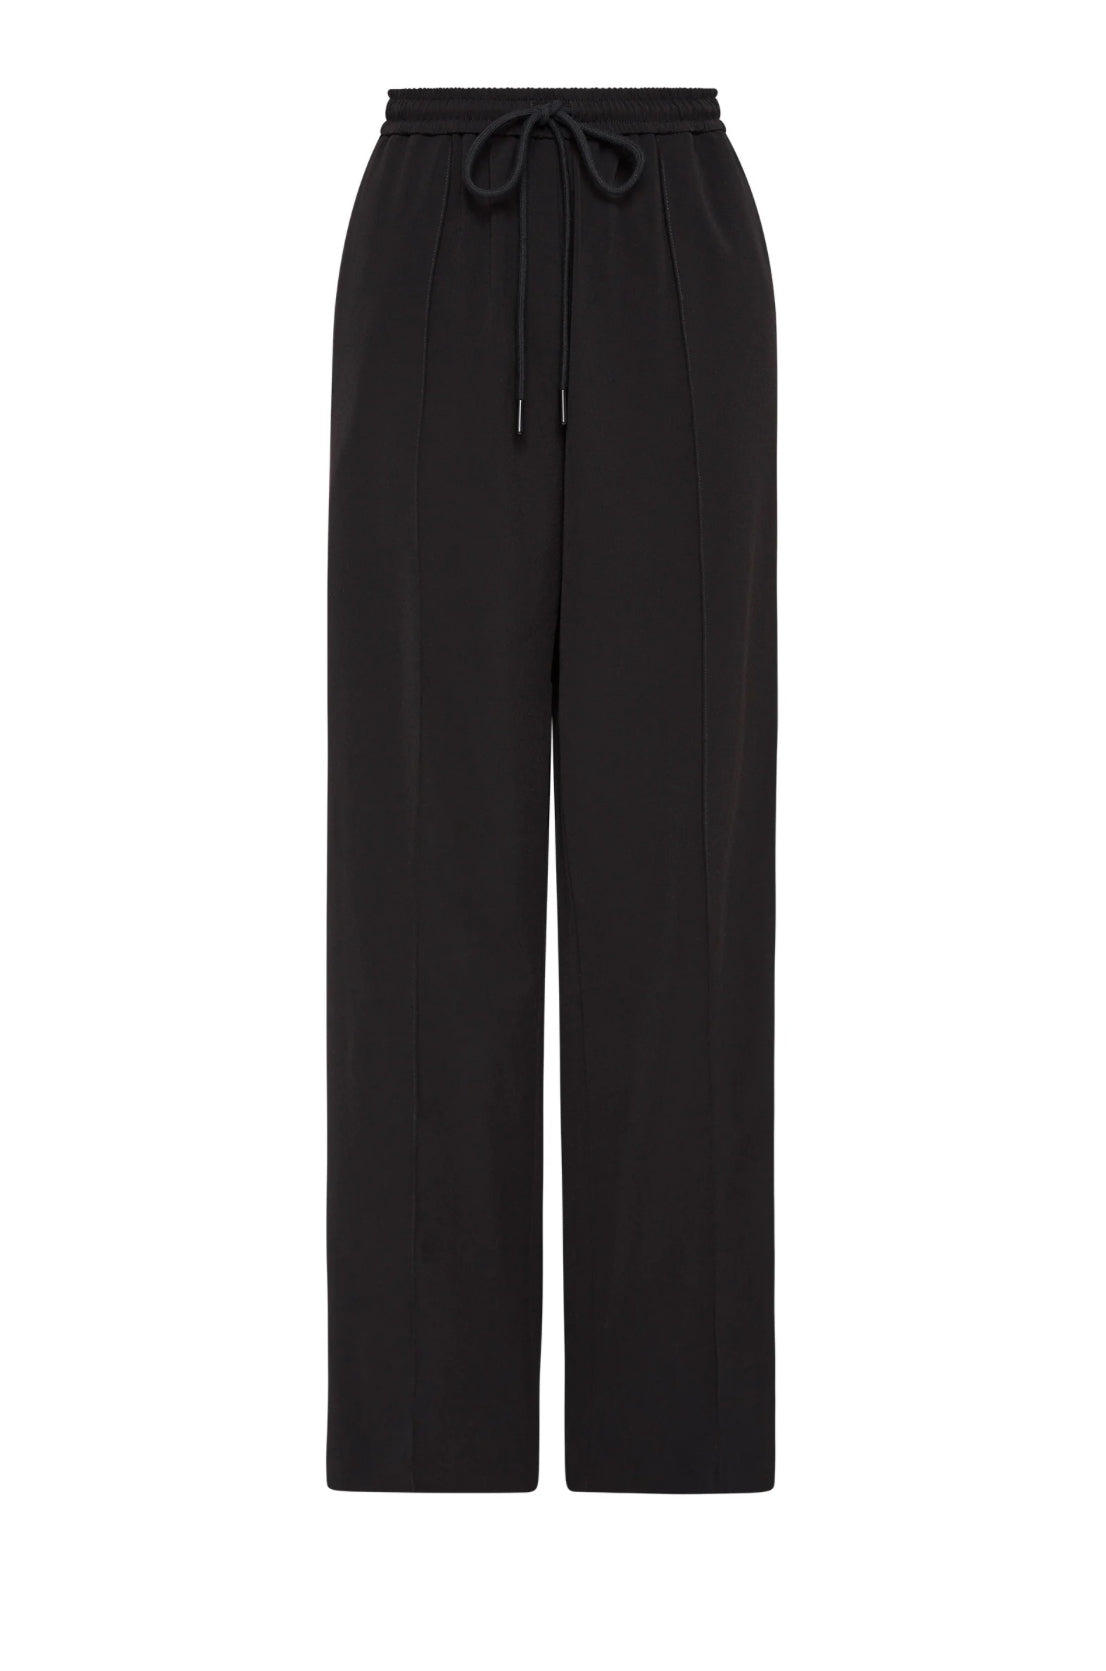 Nude Lucy Quincy Pant in Black